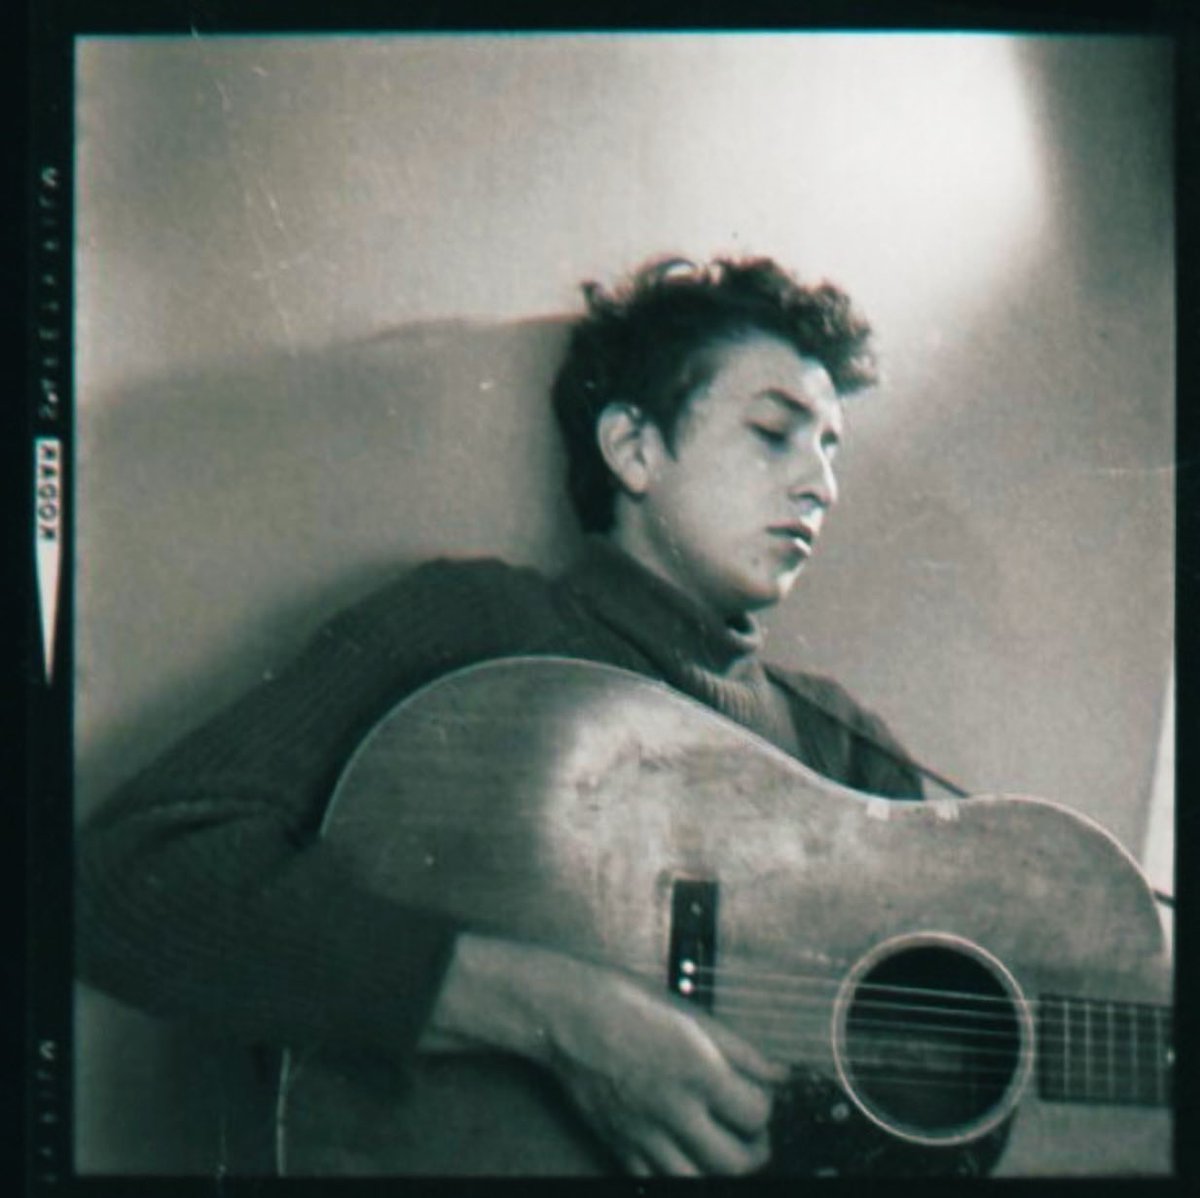 Bob Dylan poses for what may be his earliest professional photo shoot, St. Paul, Minnesota, 1960. 📸: Deanna Harris Hoffman. #BobDylan #Dylan